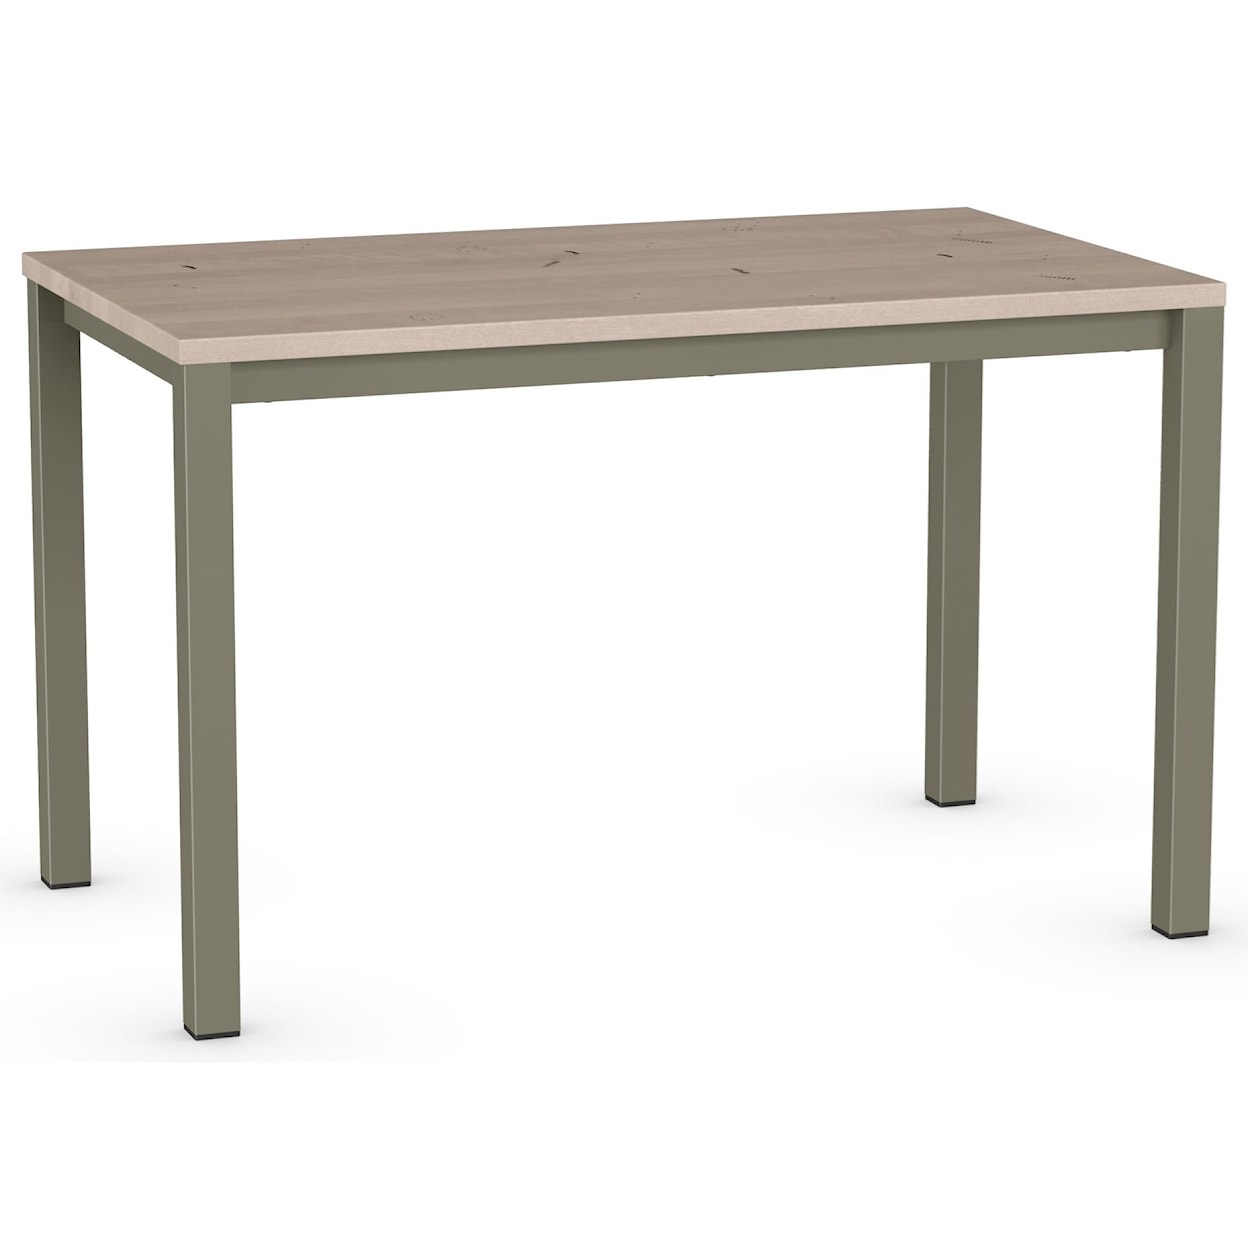 Amisco Urban Counter Harrison Pub Table with Wood Top